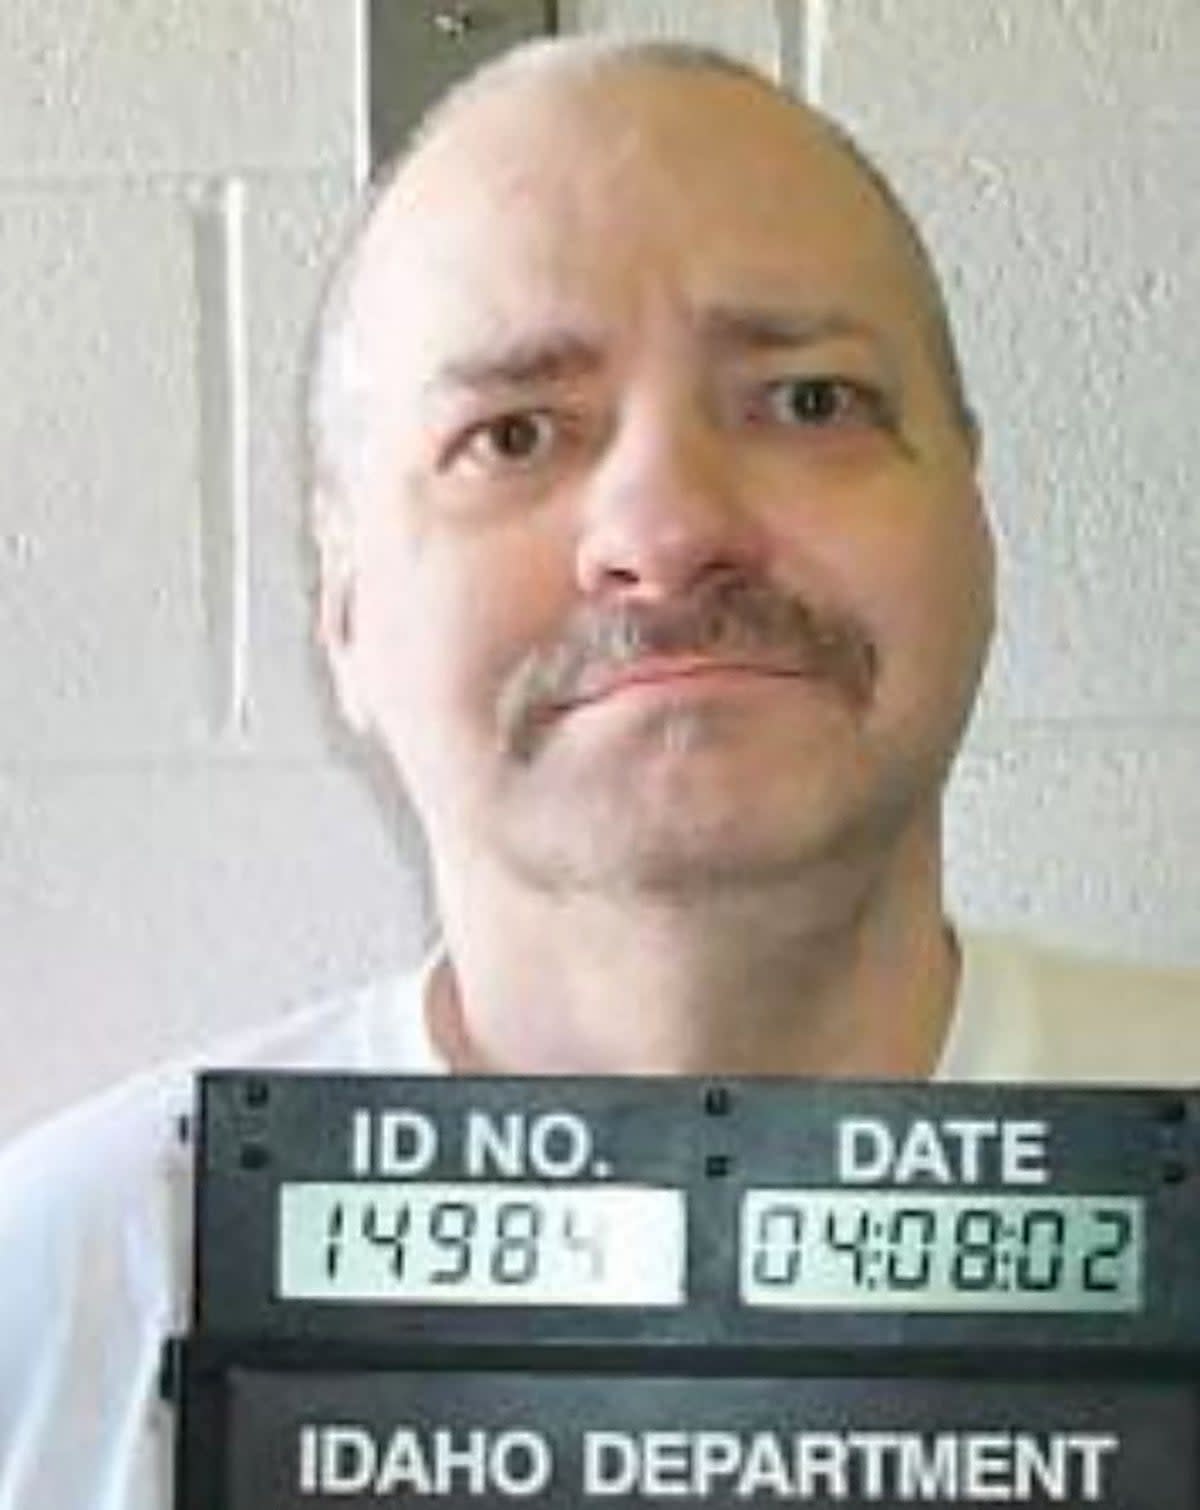 This April 8, 2002, image obtained from the Idaho Department of Correction shows death row inmate Thomas Creech (Idaho Department of Correction/A)